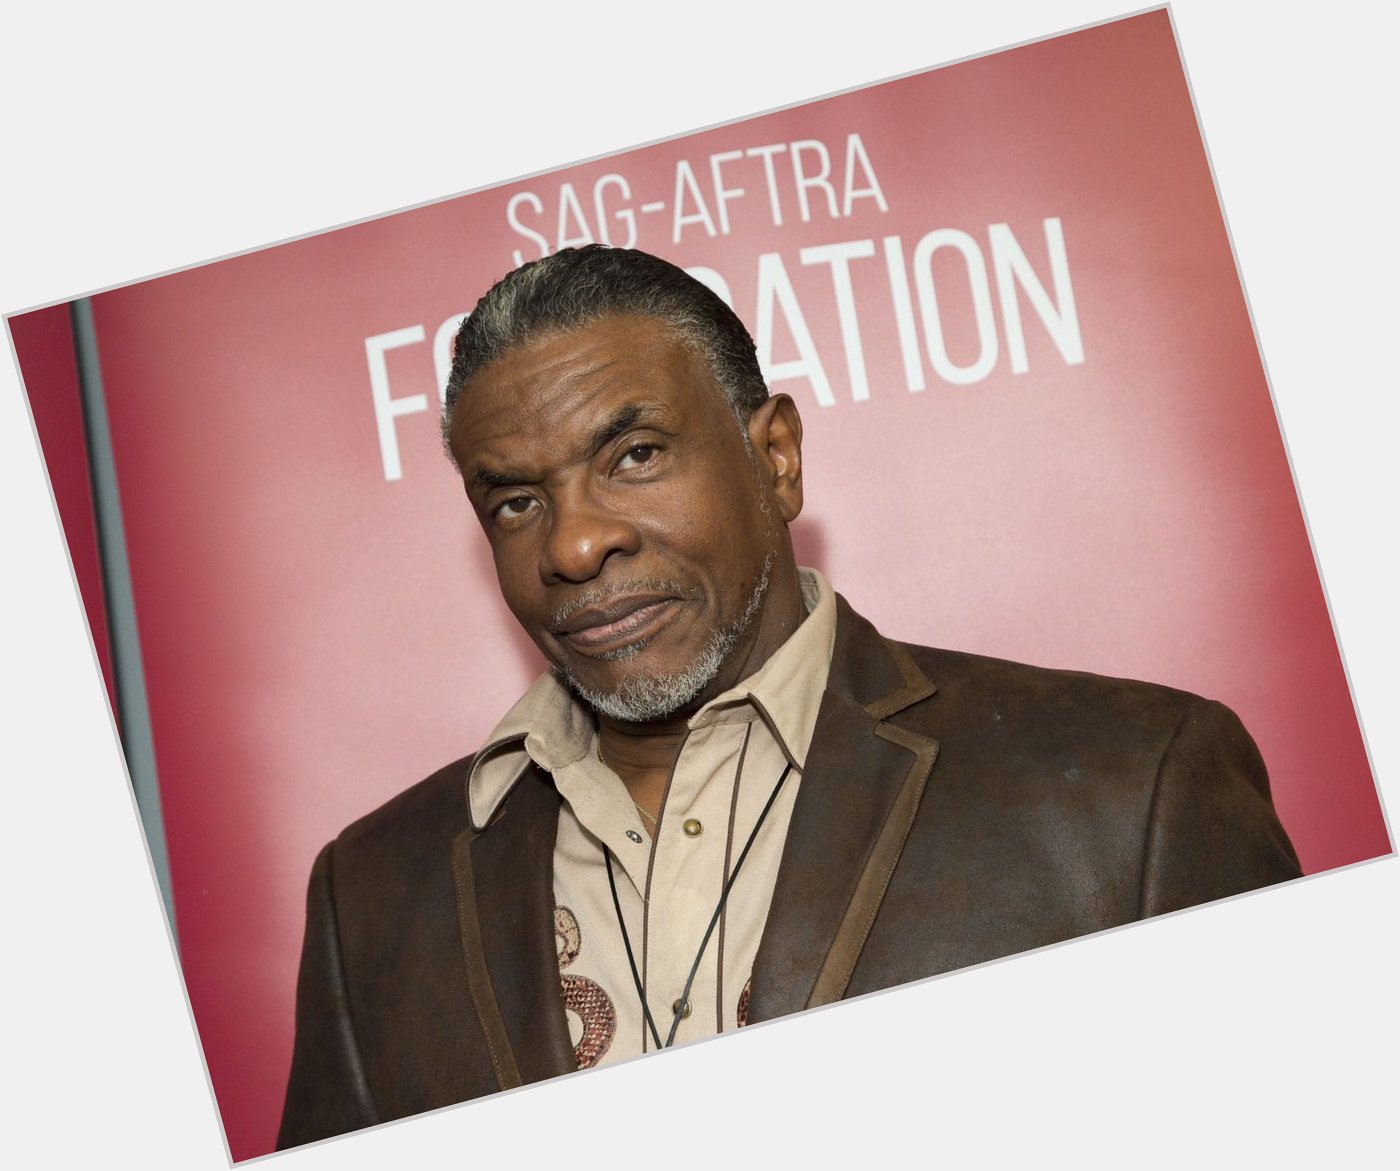 This man has one of THE BEST voices in the game. Happy Birthday, Keith David! 